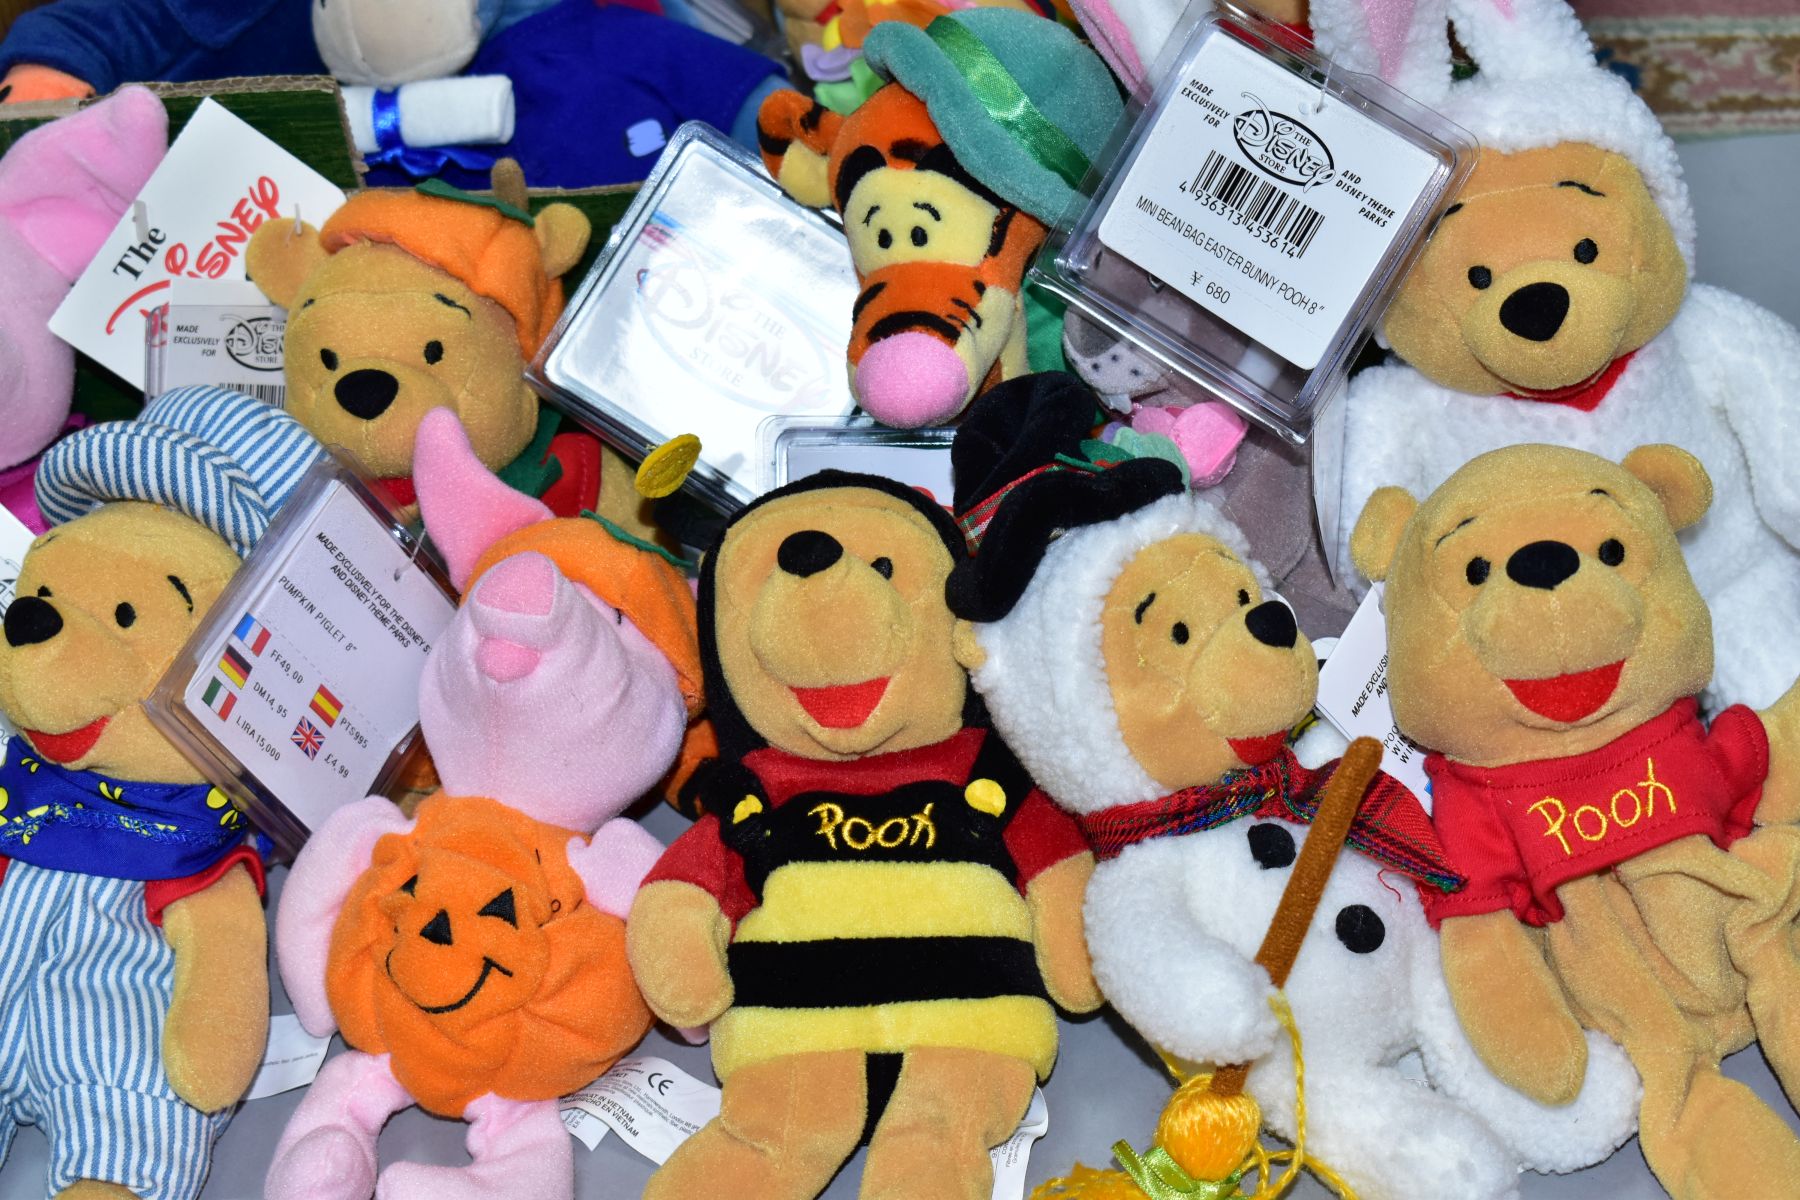 A BOX OF DISNEY BEANIE SOFT TOYS, most still with tags, characters include Winnie The Pooh, - Image 2 of 3